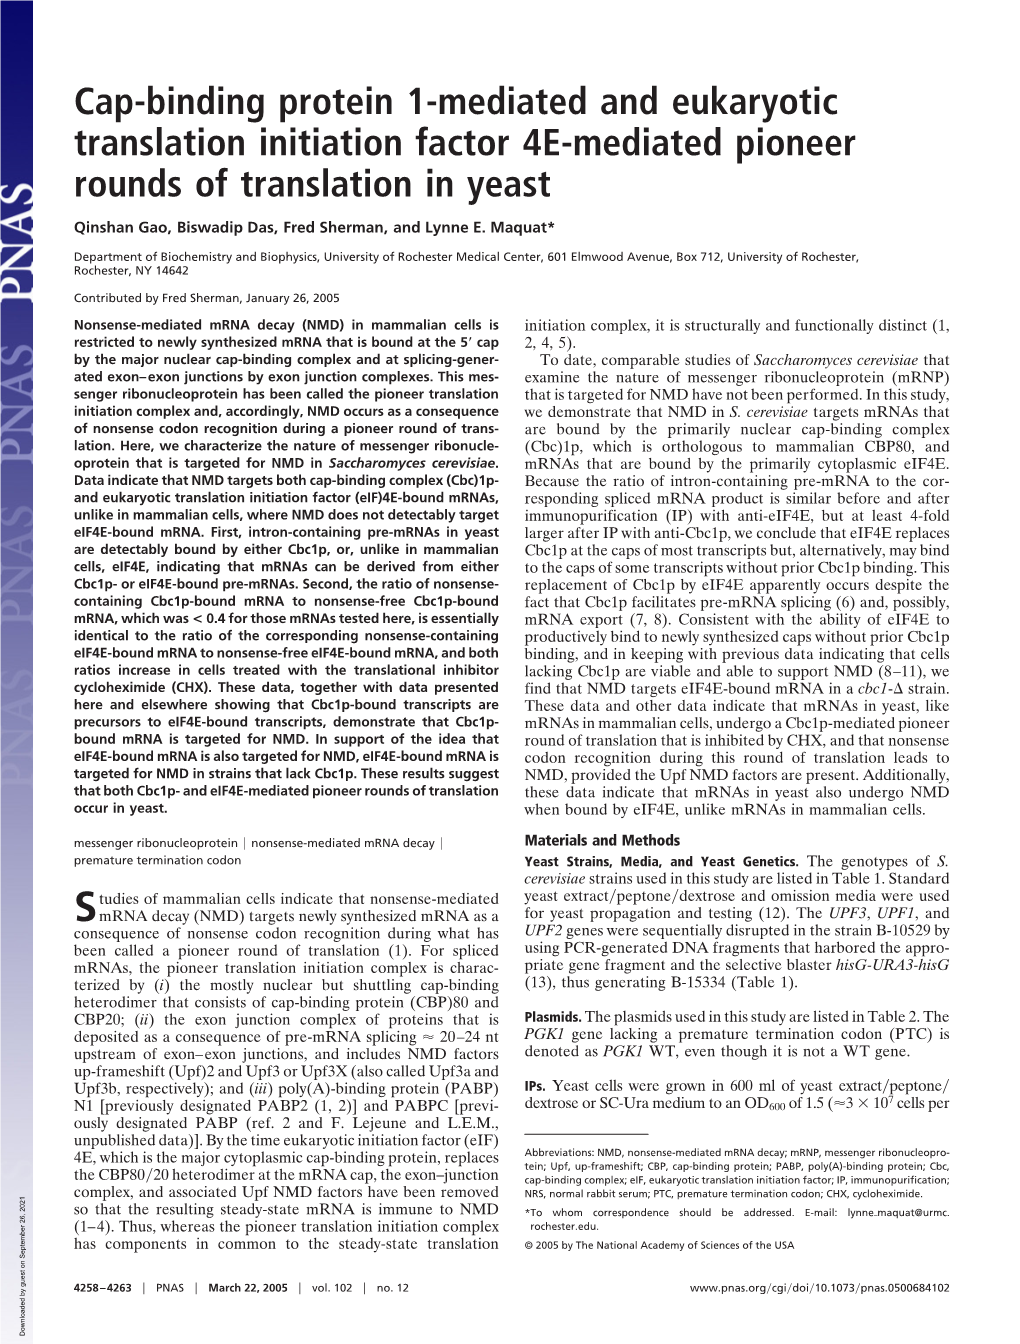 Cap-Binding Protein 1-Mediated and Eukaryotic Translation Initiation Factor 4E-Mediated Pioneer Rounds of Translation in Yeast